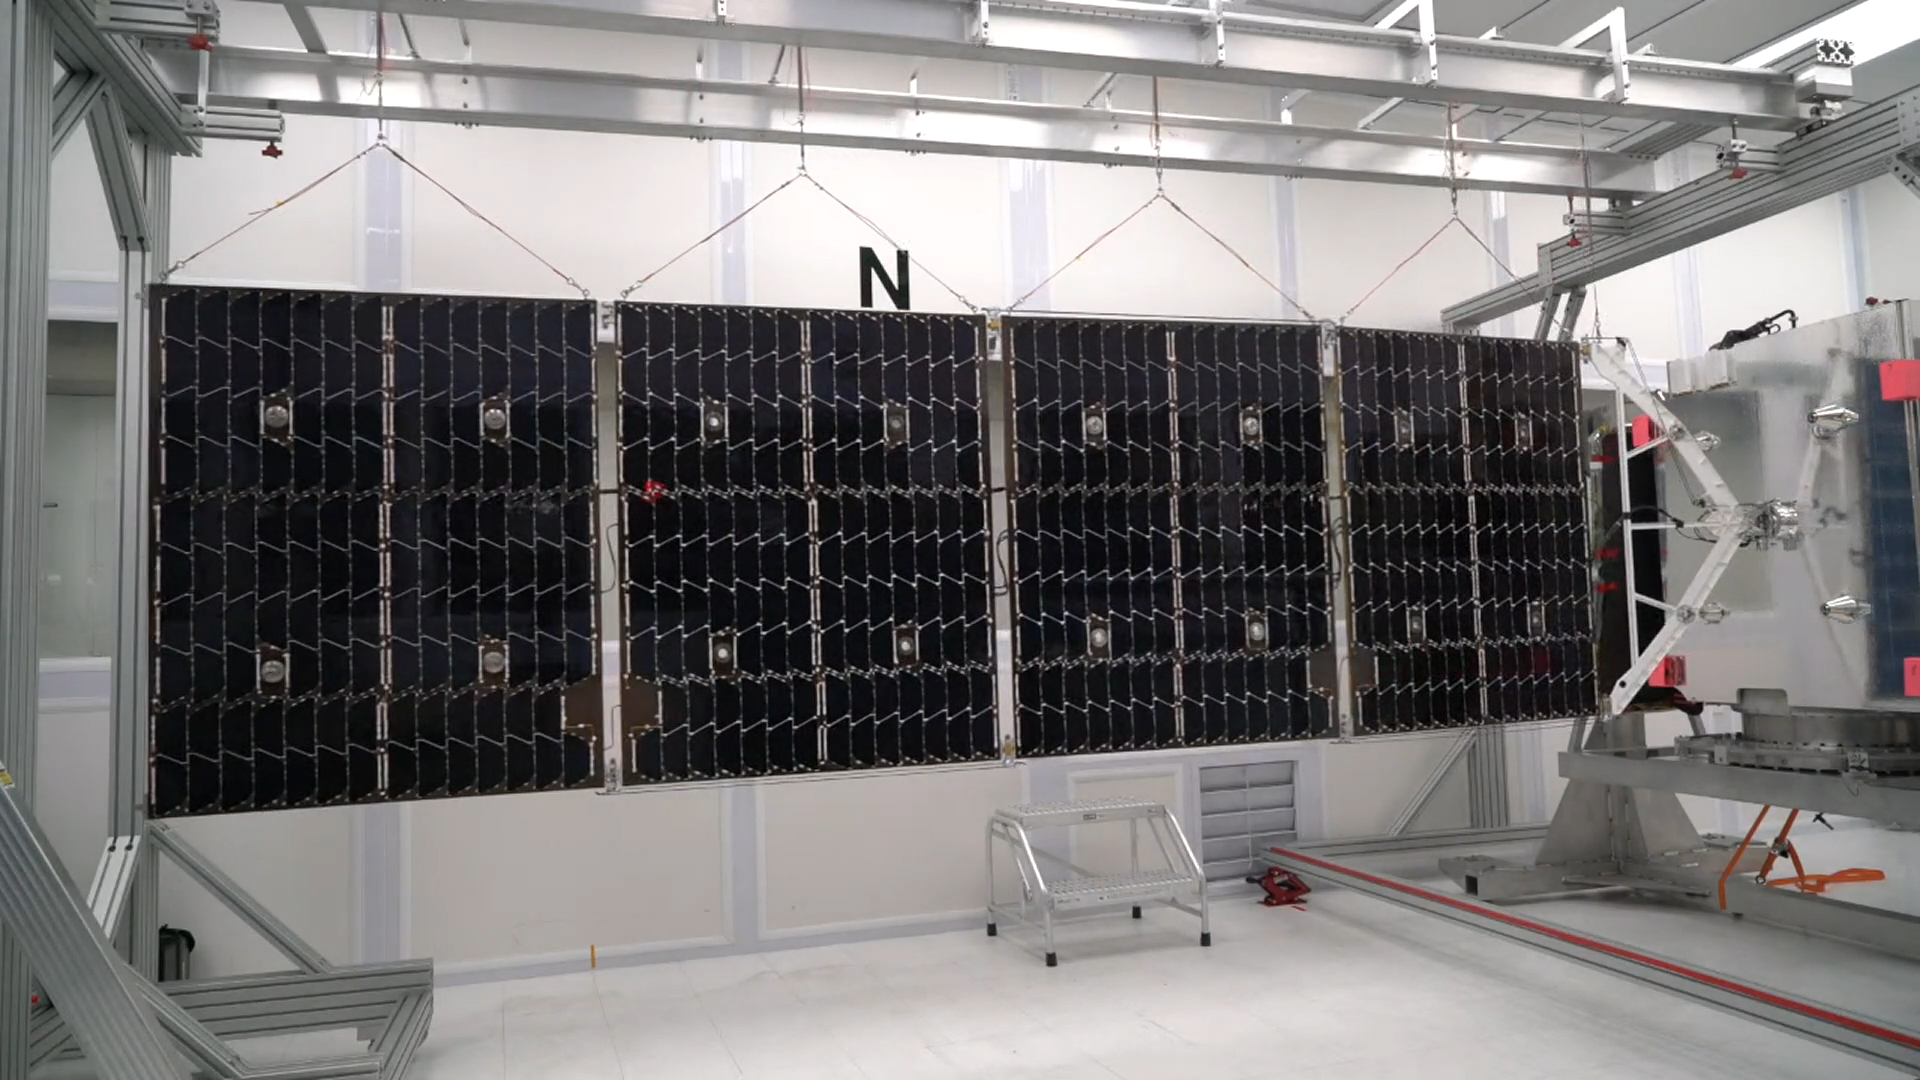 Arcturus, the first MicroGEO satellite from Astranis Space Technologies performs final solar array deployment testing.